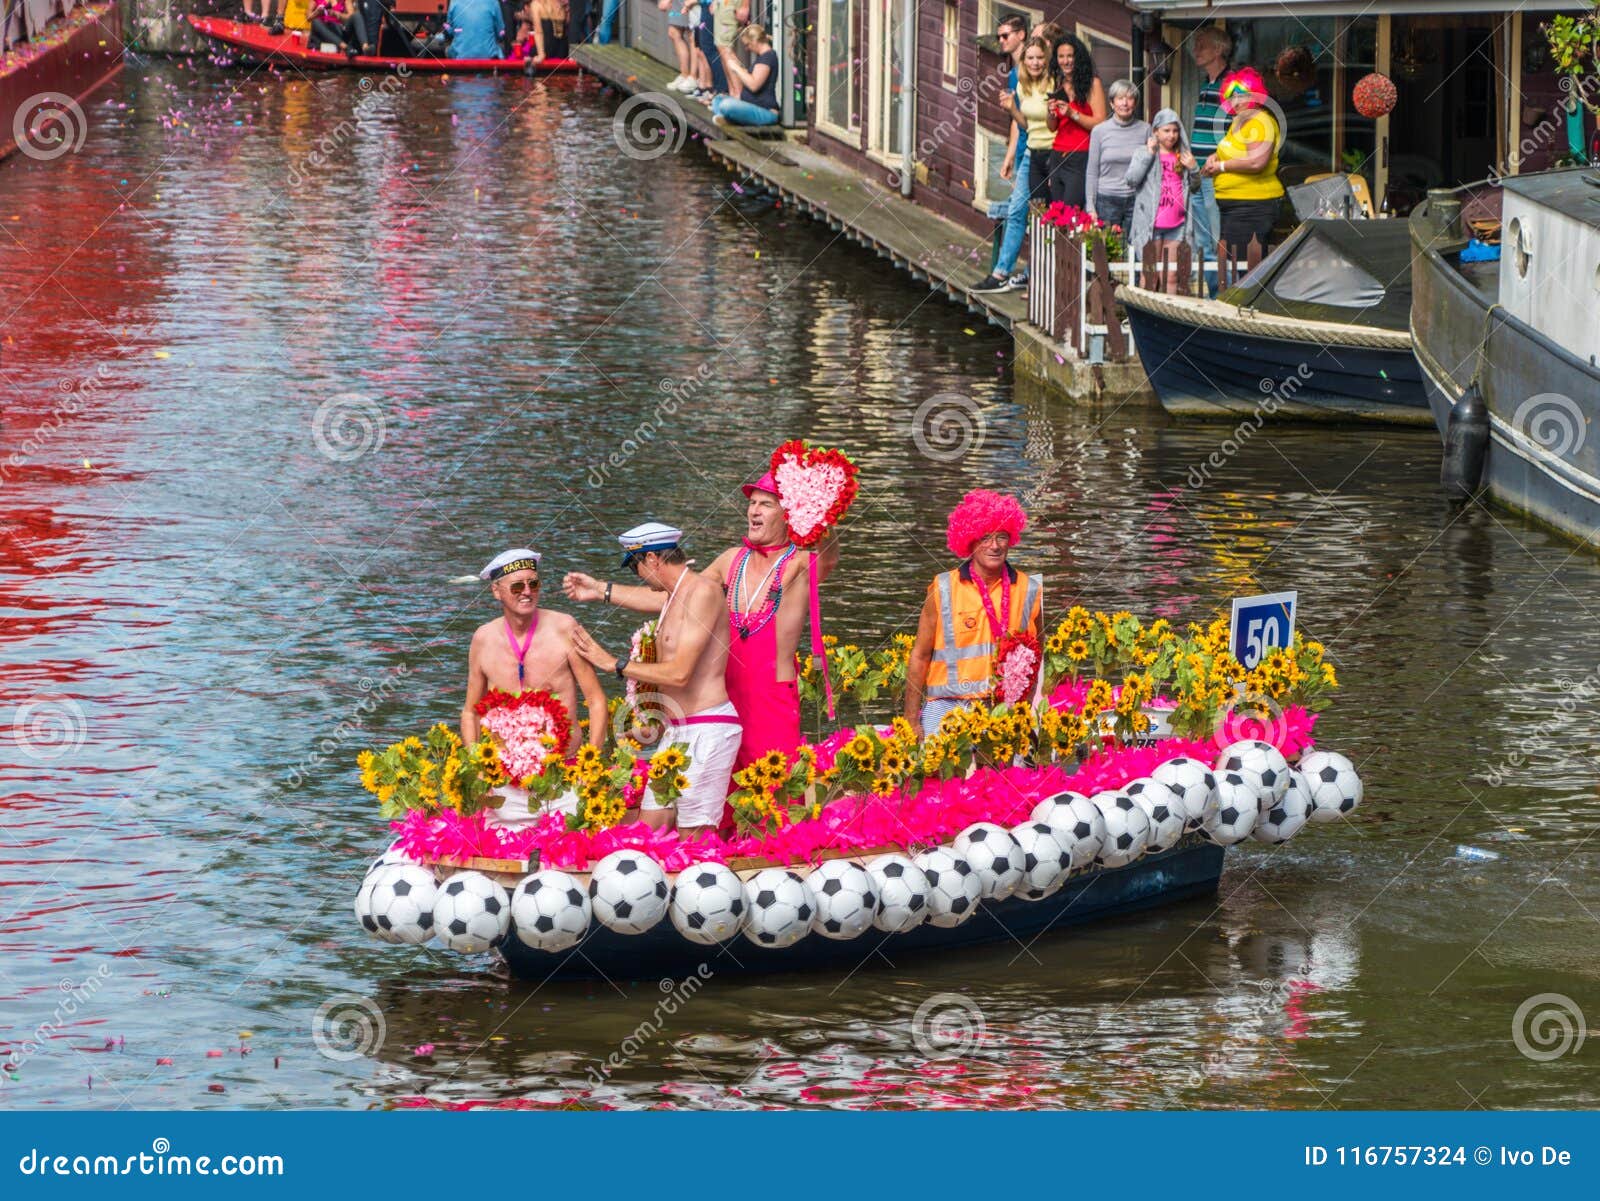 Amsterdam August 5 2017 Smallesr Boat Of The 2017 Canal Parade Editorial Stock Image Image